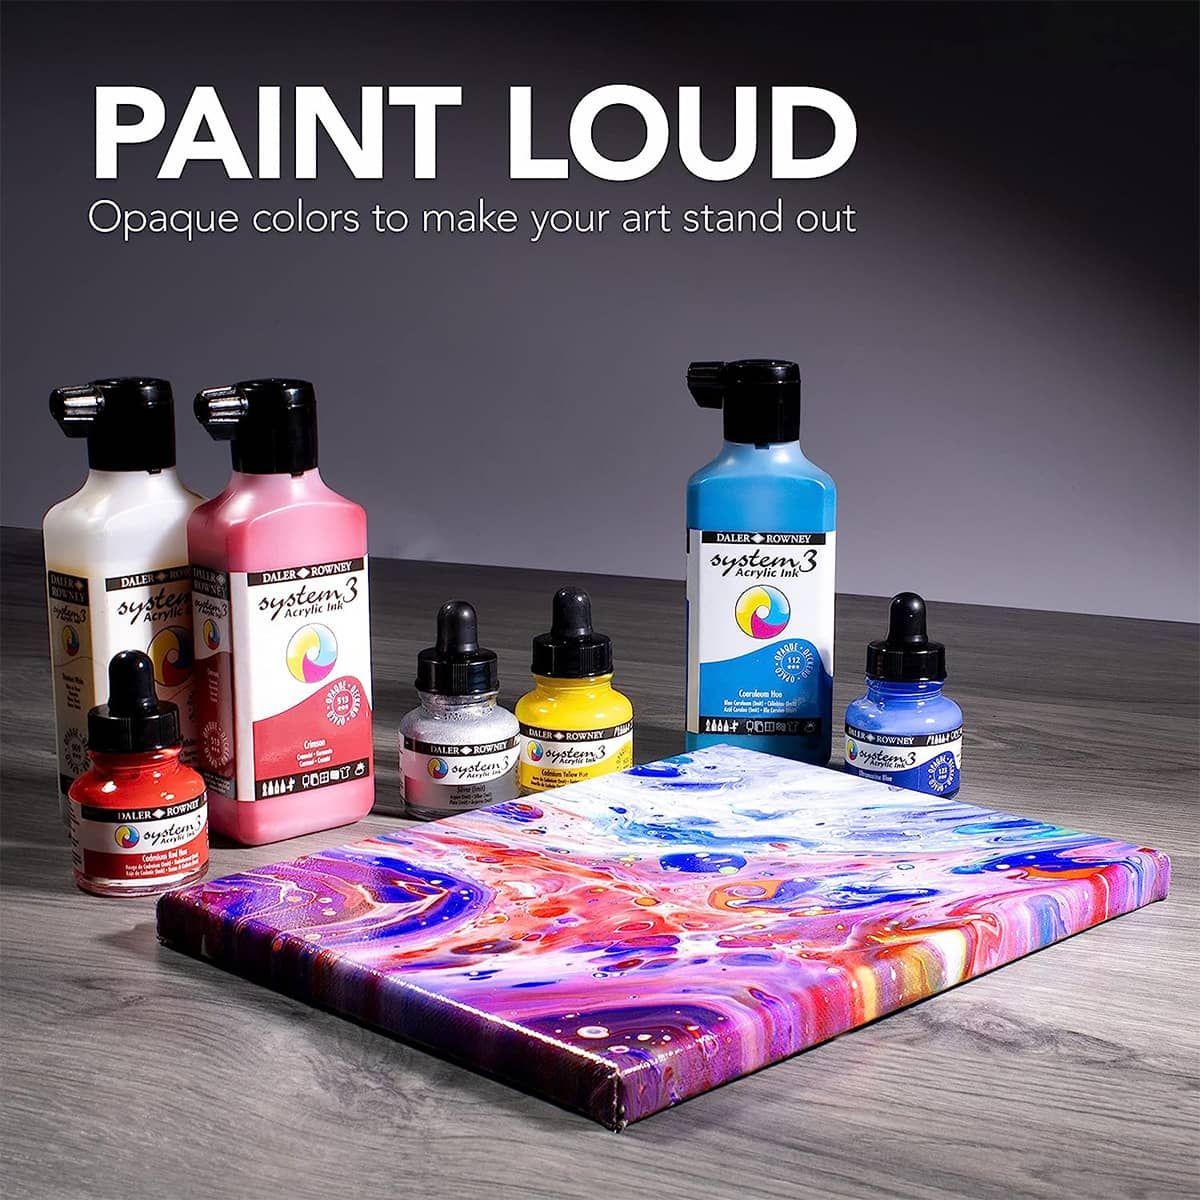 Opaque colors to make your art stand out